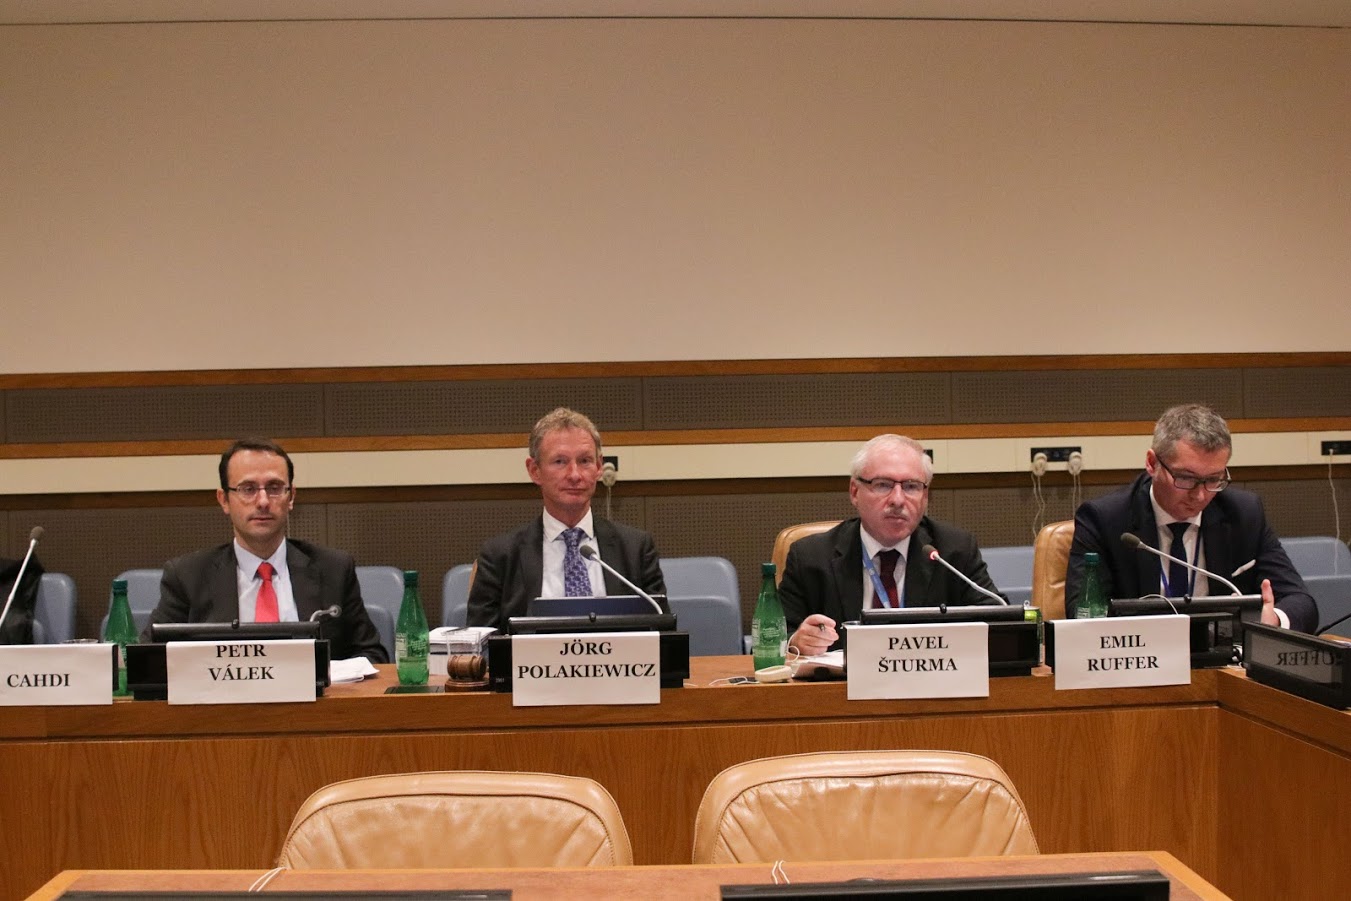 CAHDI Side-Event during UNGA Sixth Committee: “The CAHDI Contribution to the International Law Practice”